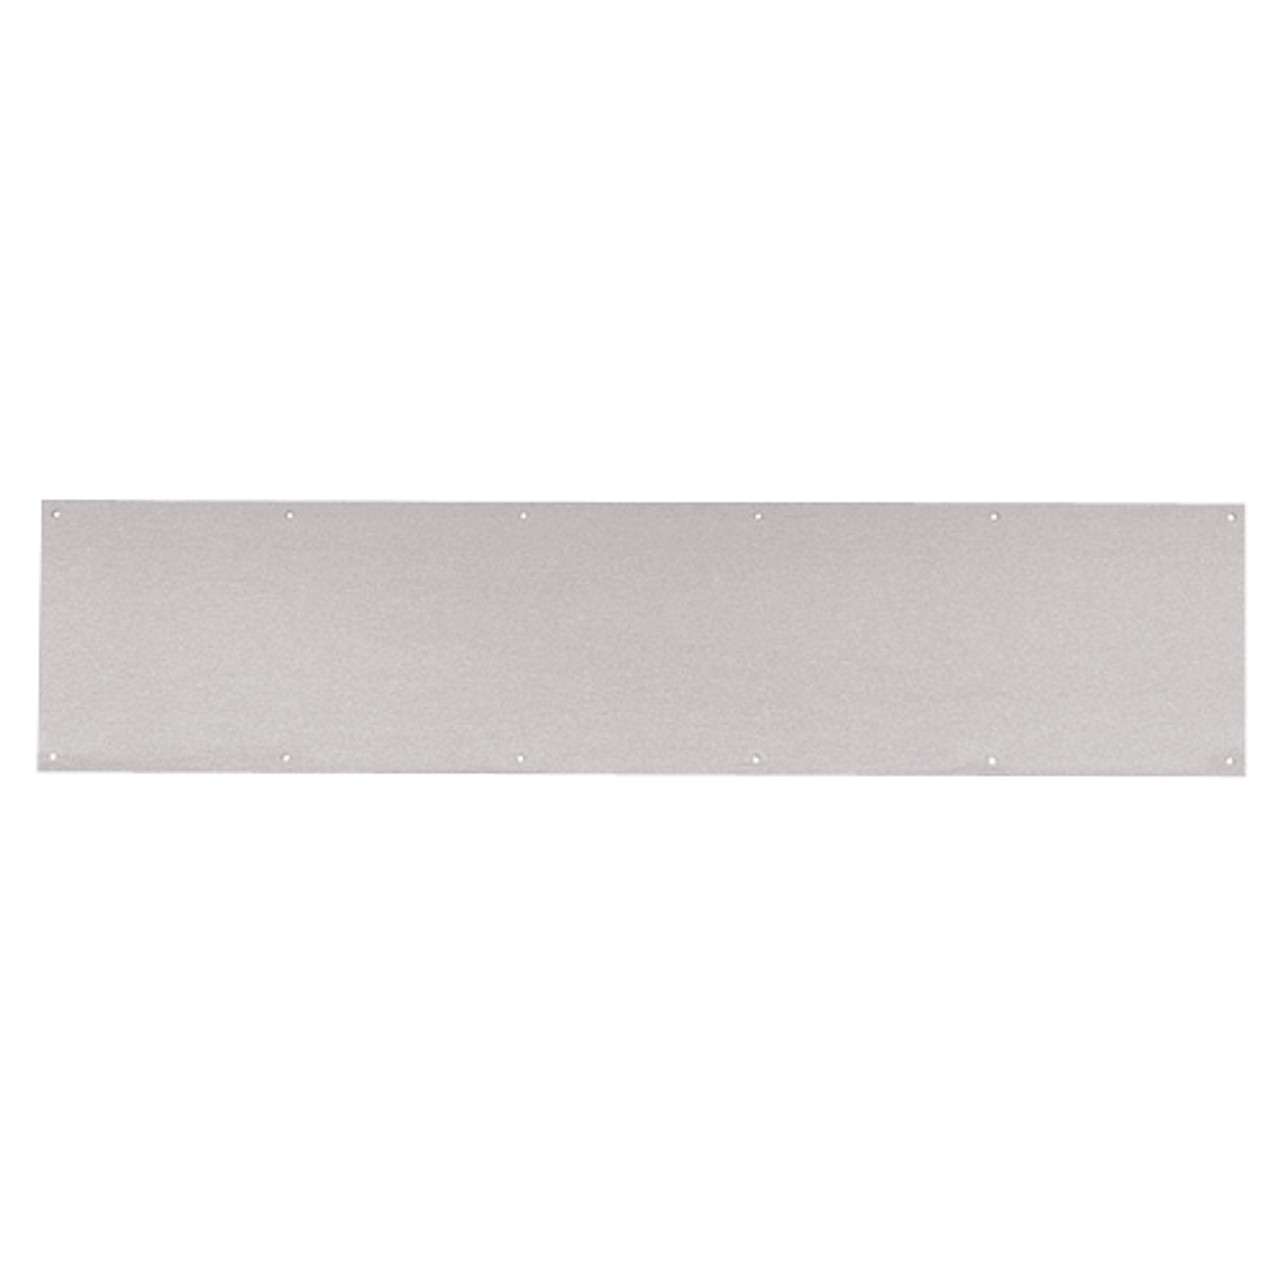 8400-US32D-21x48-B-CS Ives 8400 Series Protection Plate in Satin Stainless Steel